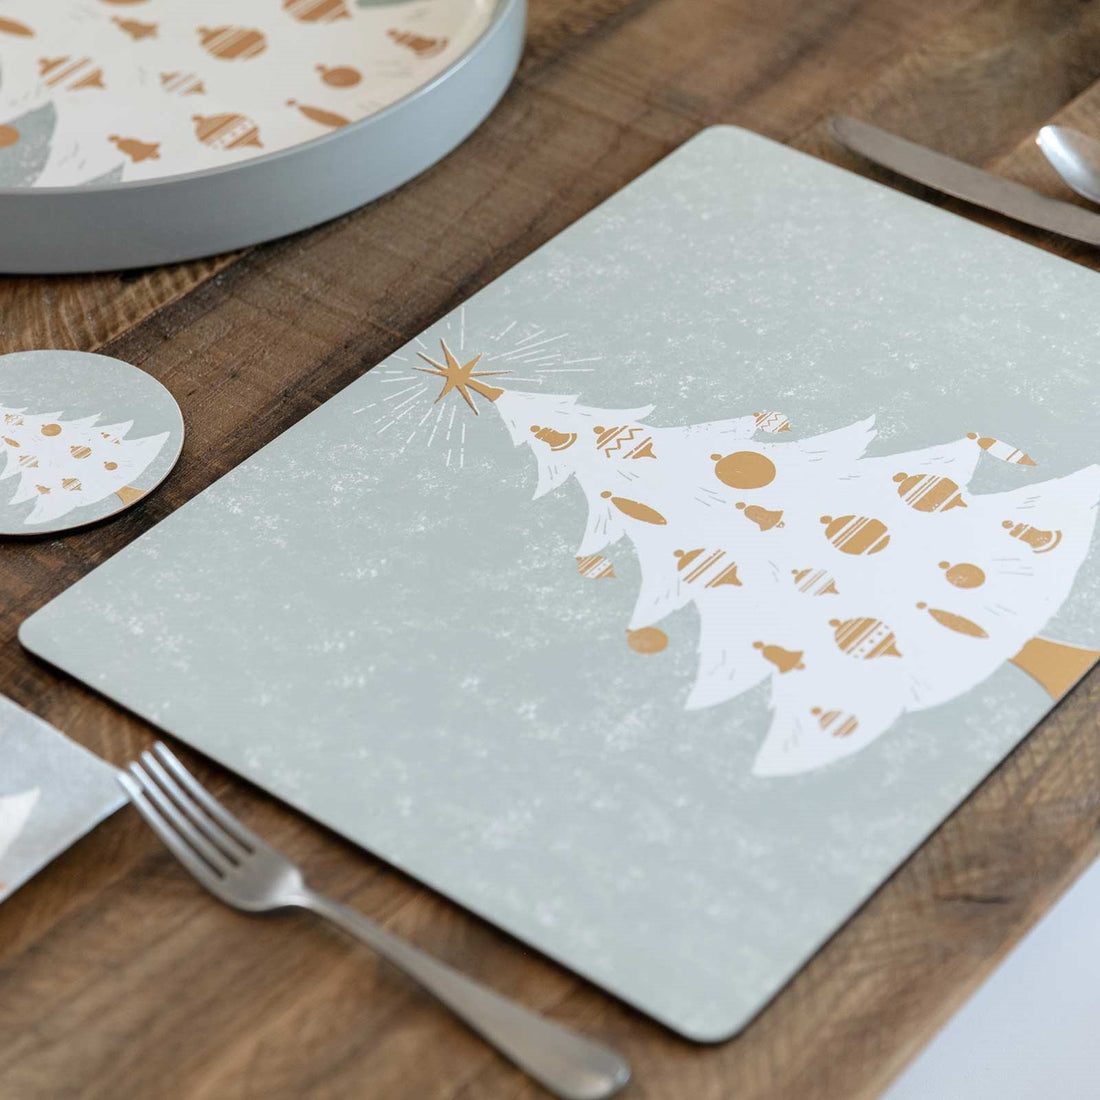 Winter White Tree Art Placemats - Set of 4 Placemat - rockflowerpaper